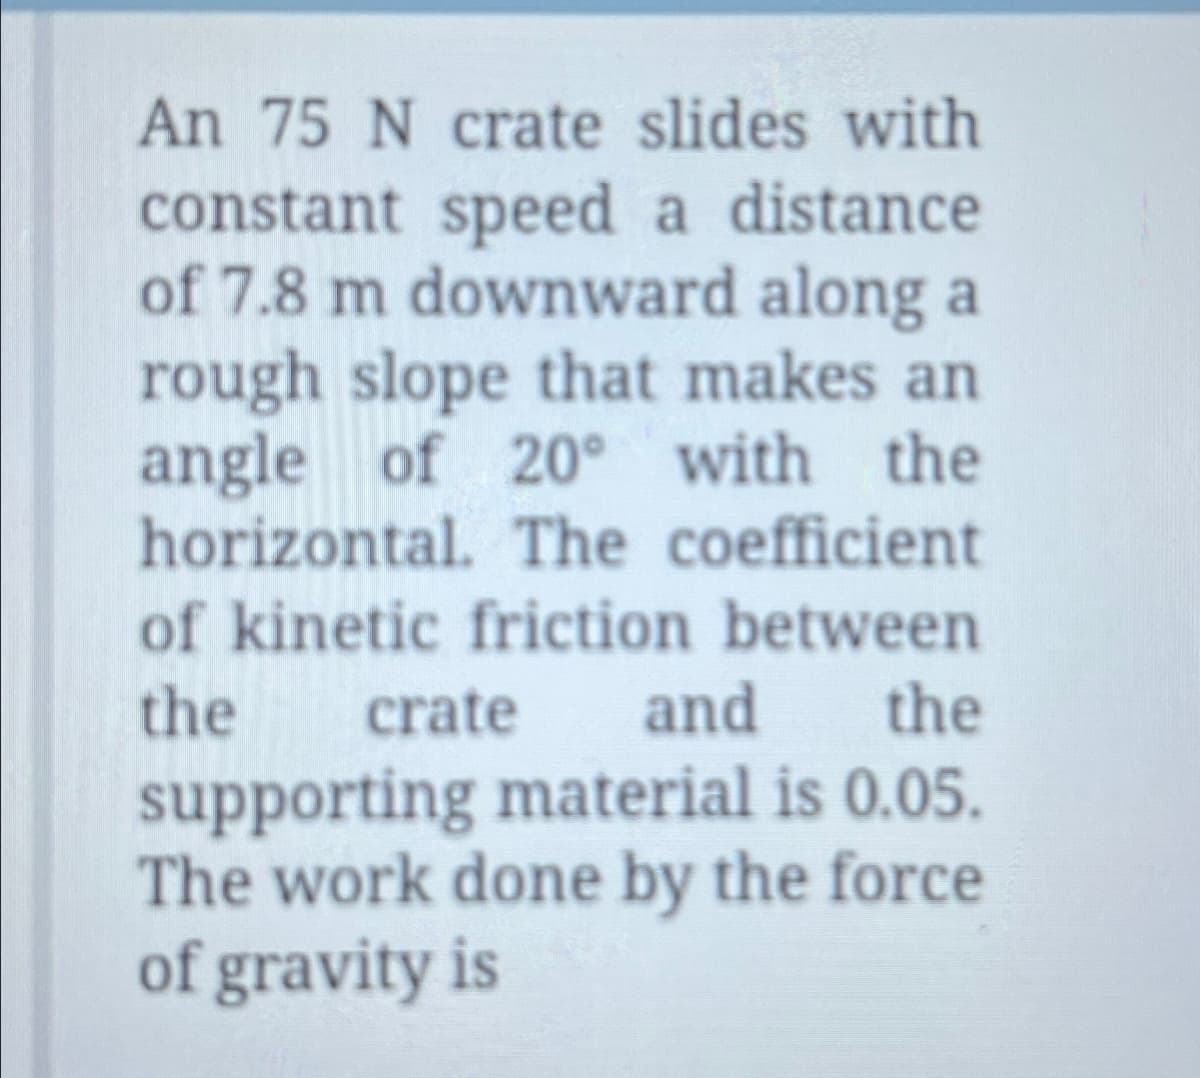 An 75 N crate slides with
constant speed a distance
of 7.8 m downward along a
rough slope that makes an
angle of 20° with the
horizontal. The coefficient
of kinetic friction between
the crate and
supporting material is 0.05.
The work done by the force
of gravity is
the